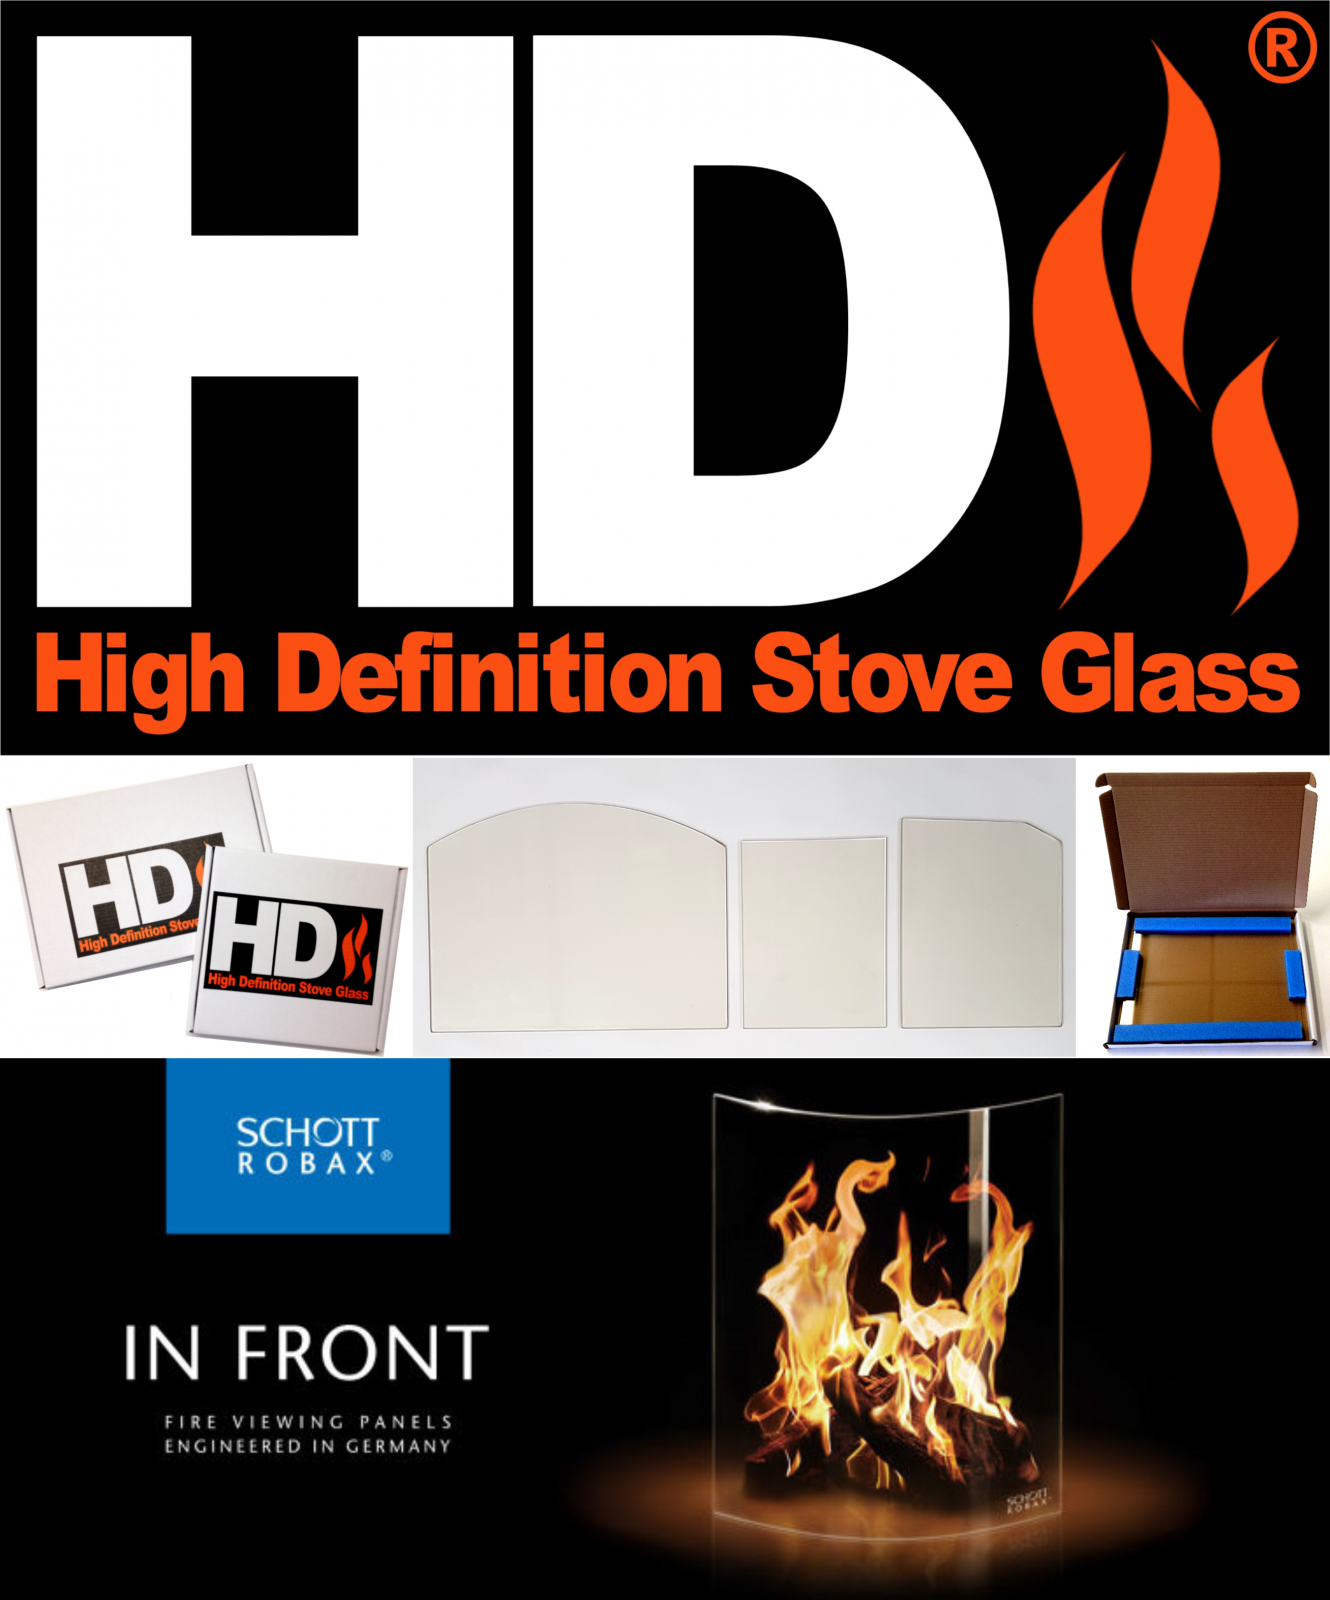 Beefeater Yeoman Elegance High Definition Heat Resistant Replacement Stove Glass G330256 